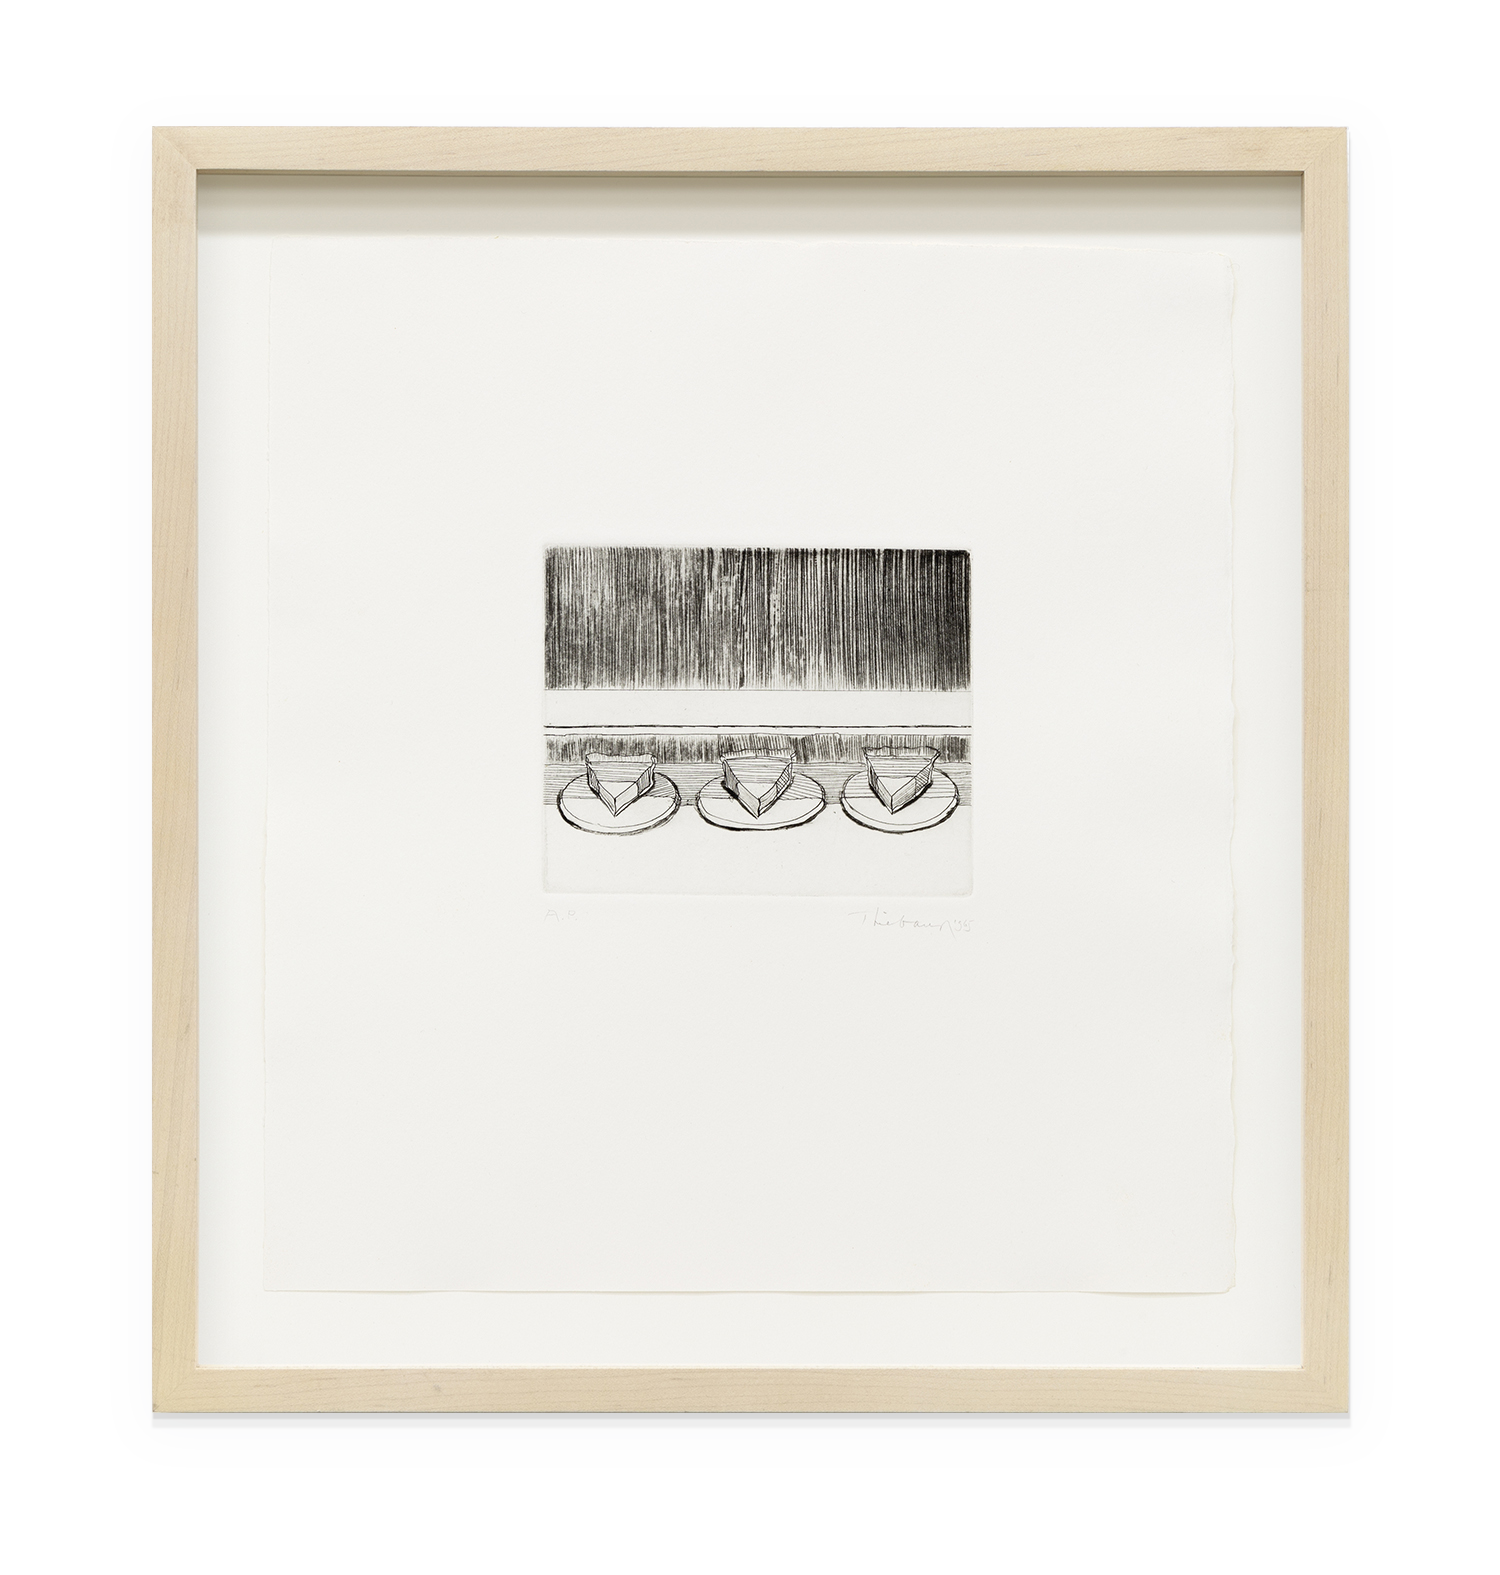 Wayne Thiebaud Case Pies, 1965 Drypoint 11 7/8 x 10 inches (30.2 x 25.4 cm) Edition of 25